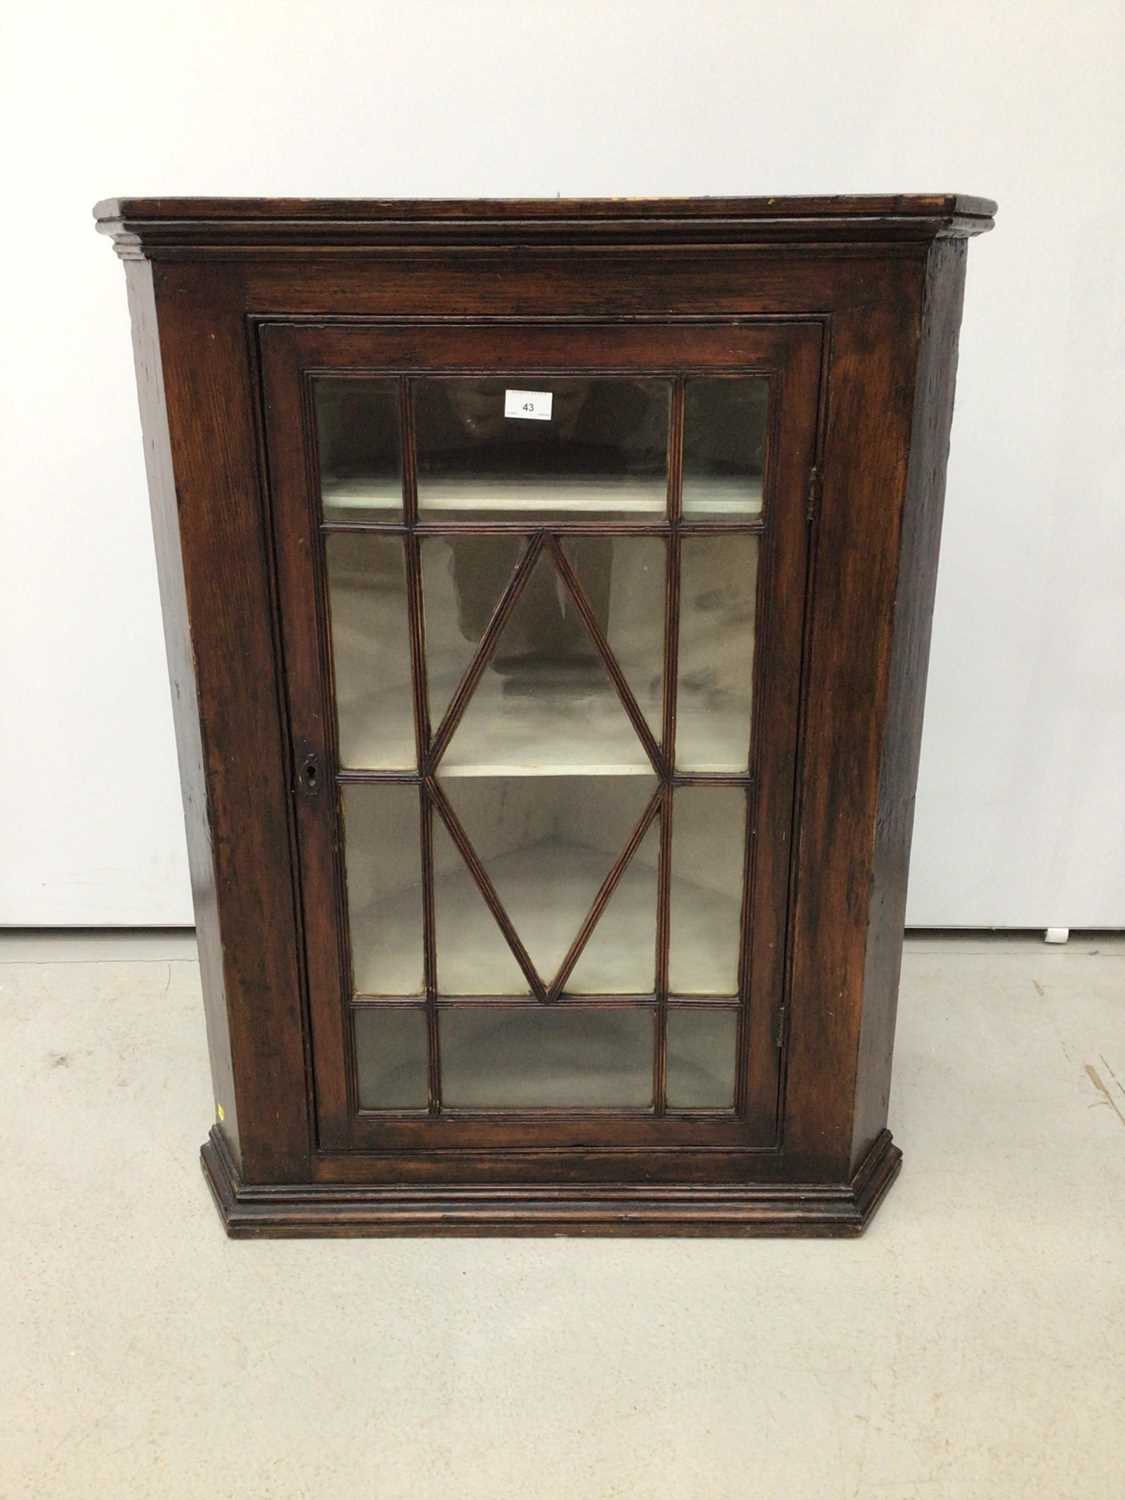 Lot 43 - 19th century stained pine corner cupboard with glazed doors enclosing shelves, 76cm wide x 97cm high